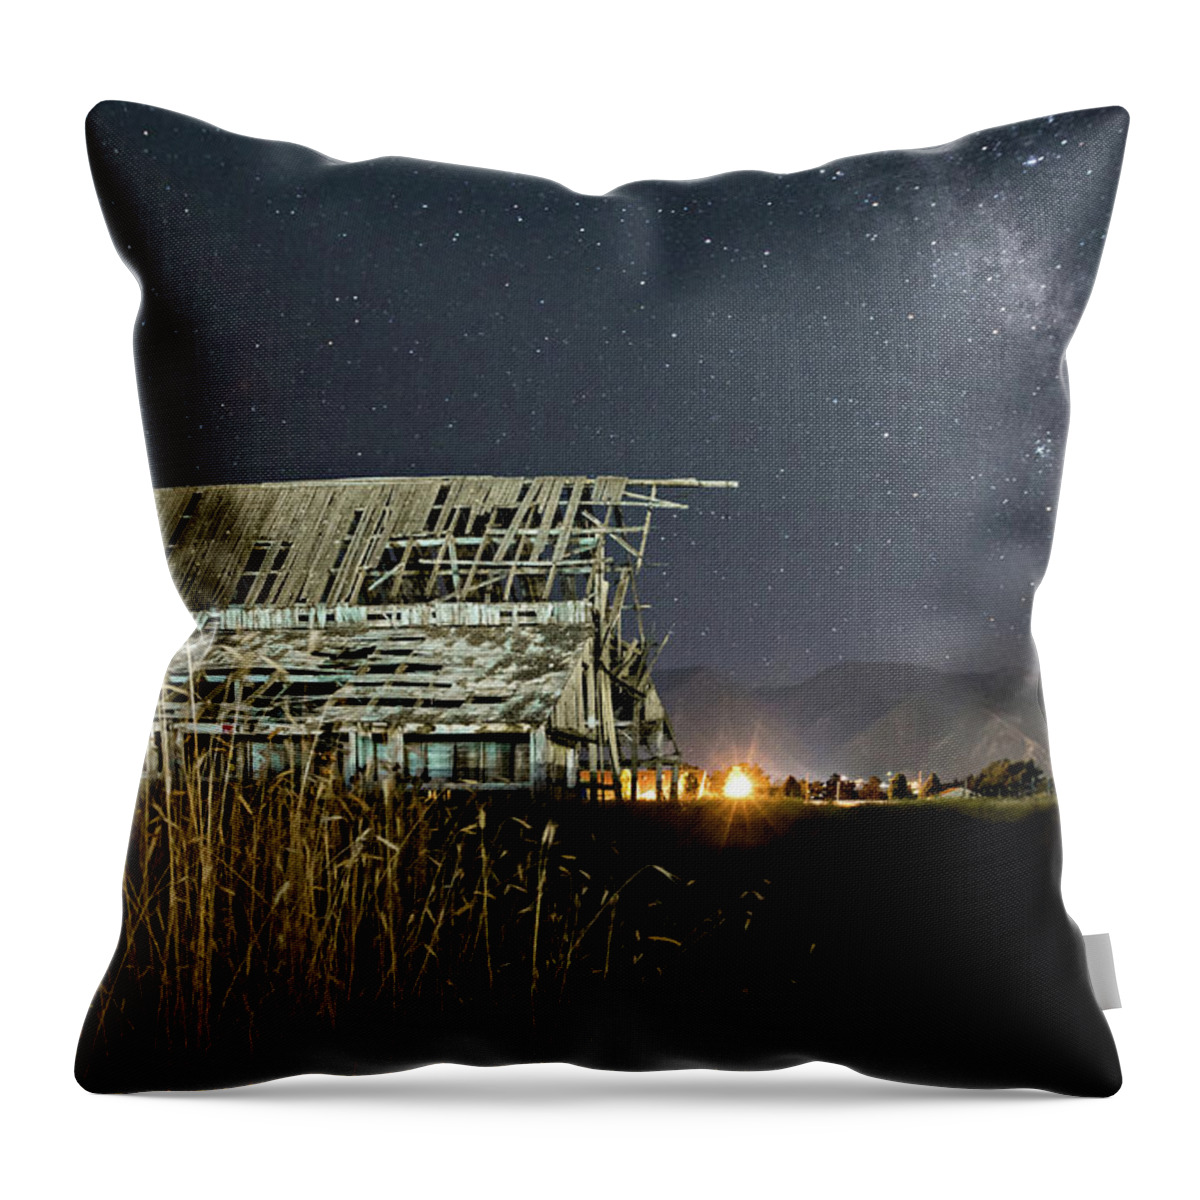 Barn Throw Pillow featuring the photograph Starry Barn by Wesley Aston